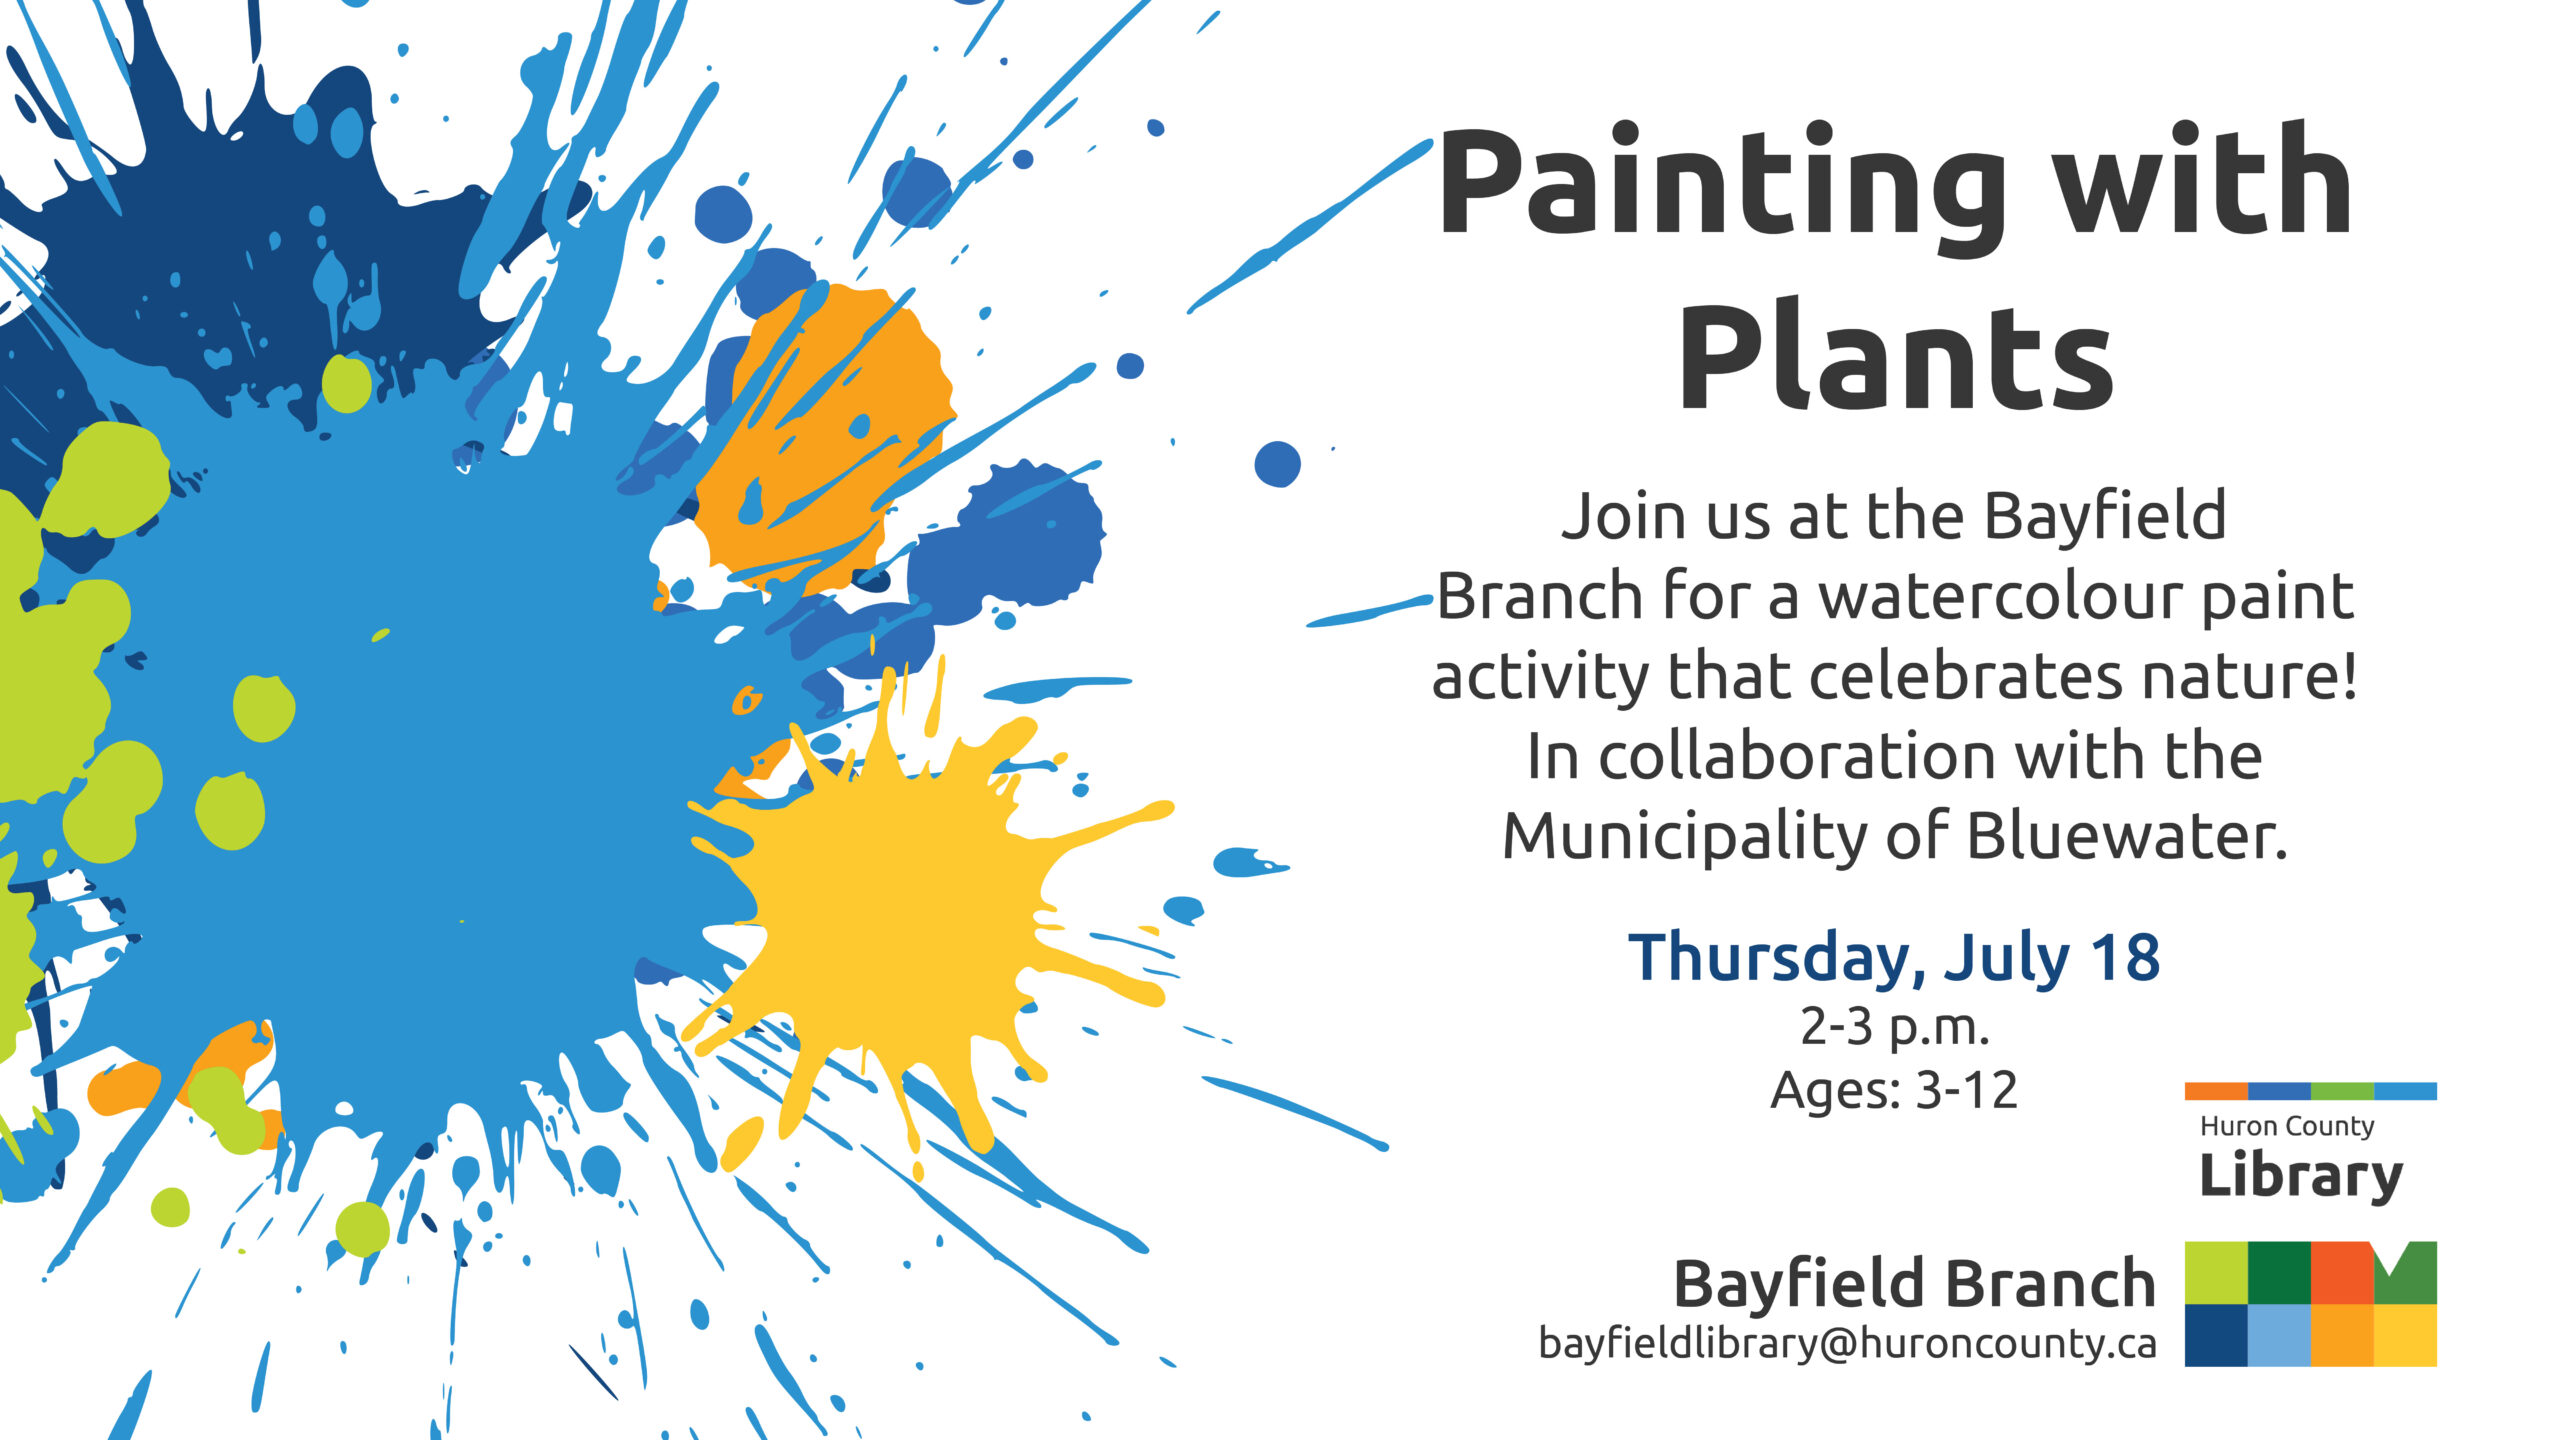 Different colours of paint splatters with text promoting Painting with Plants at Bayfield